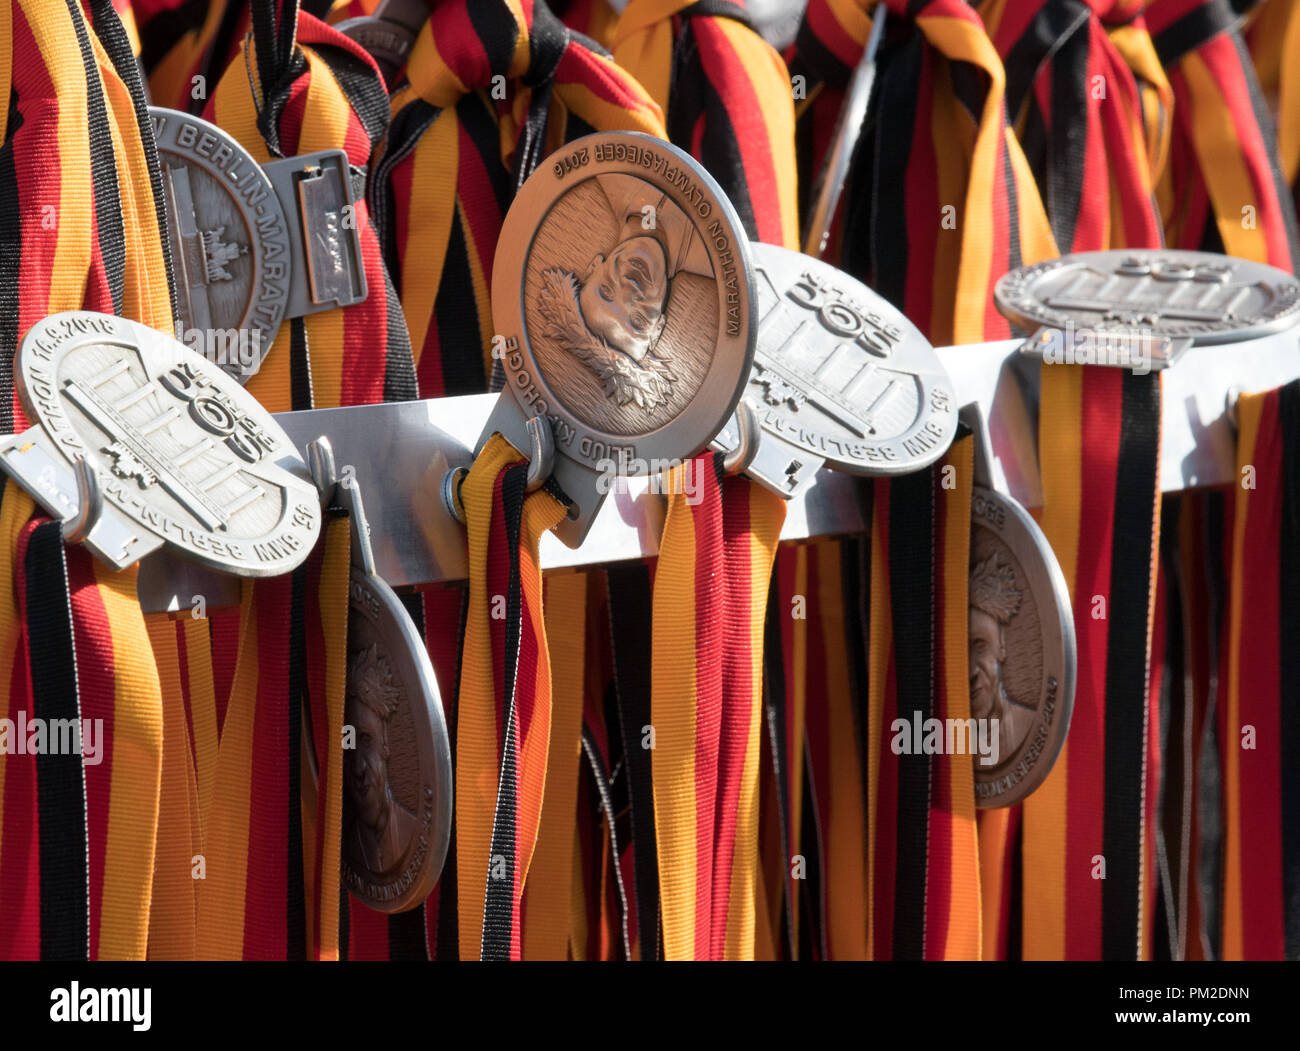 16 September 2018, Berlin: After the start of the 45th BMW Berlin Marathon,  medals for the participants will hang on a metal frame on the Straße des  17. June. Photo: Soeren Stache/dpa